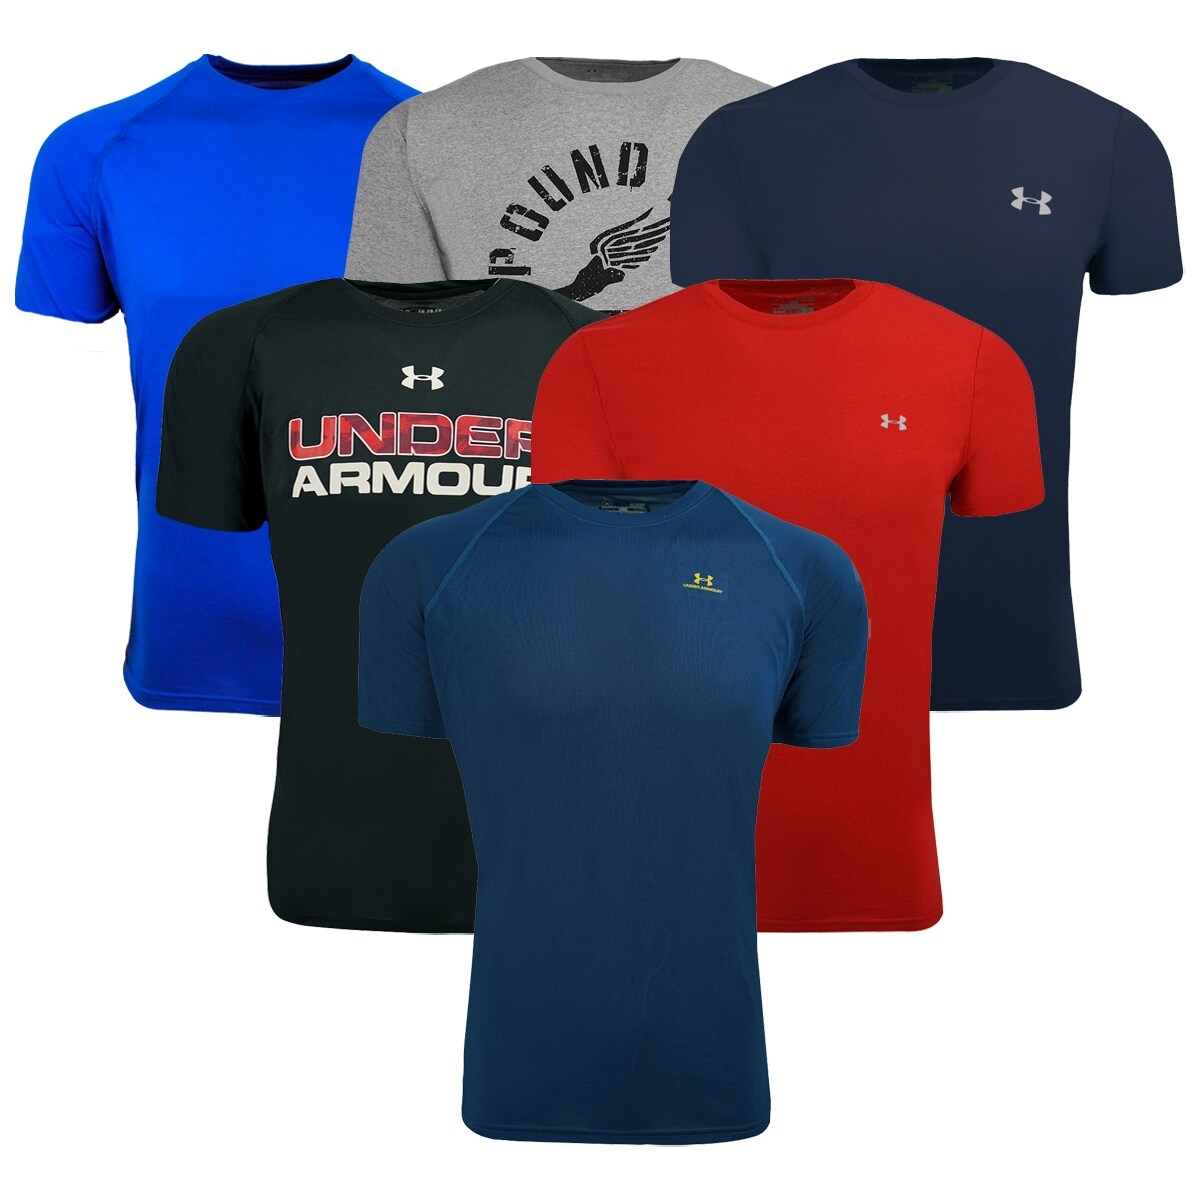 under armour men's shirts clearance